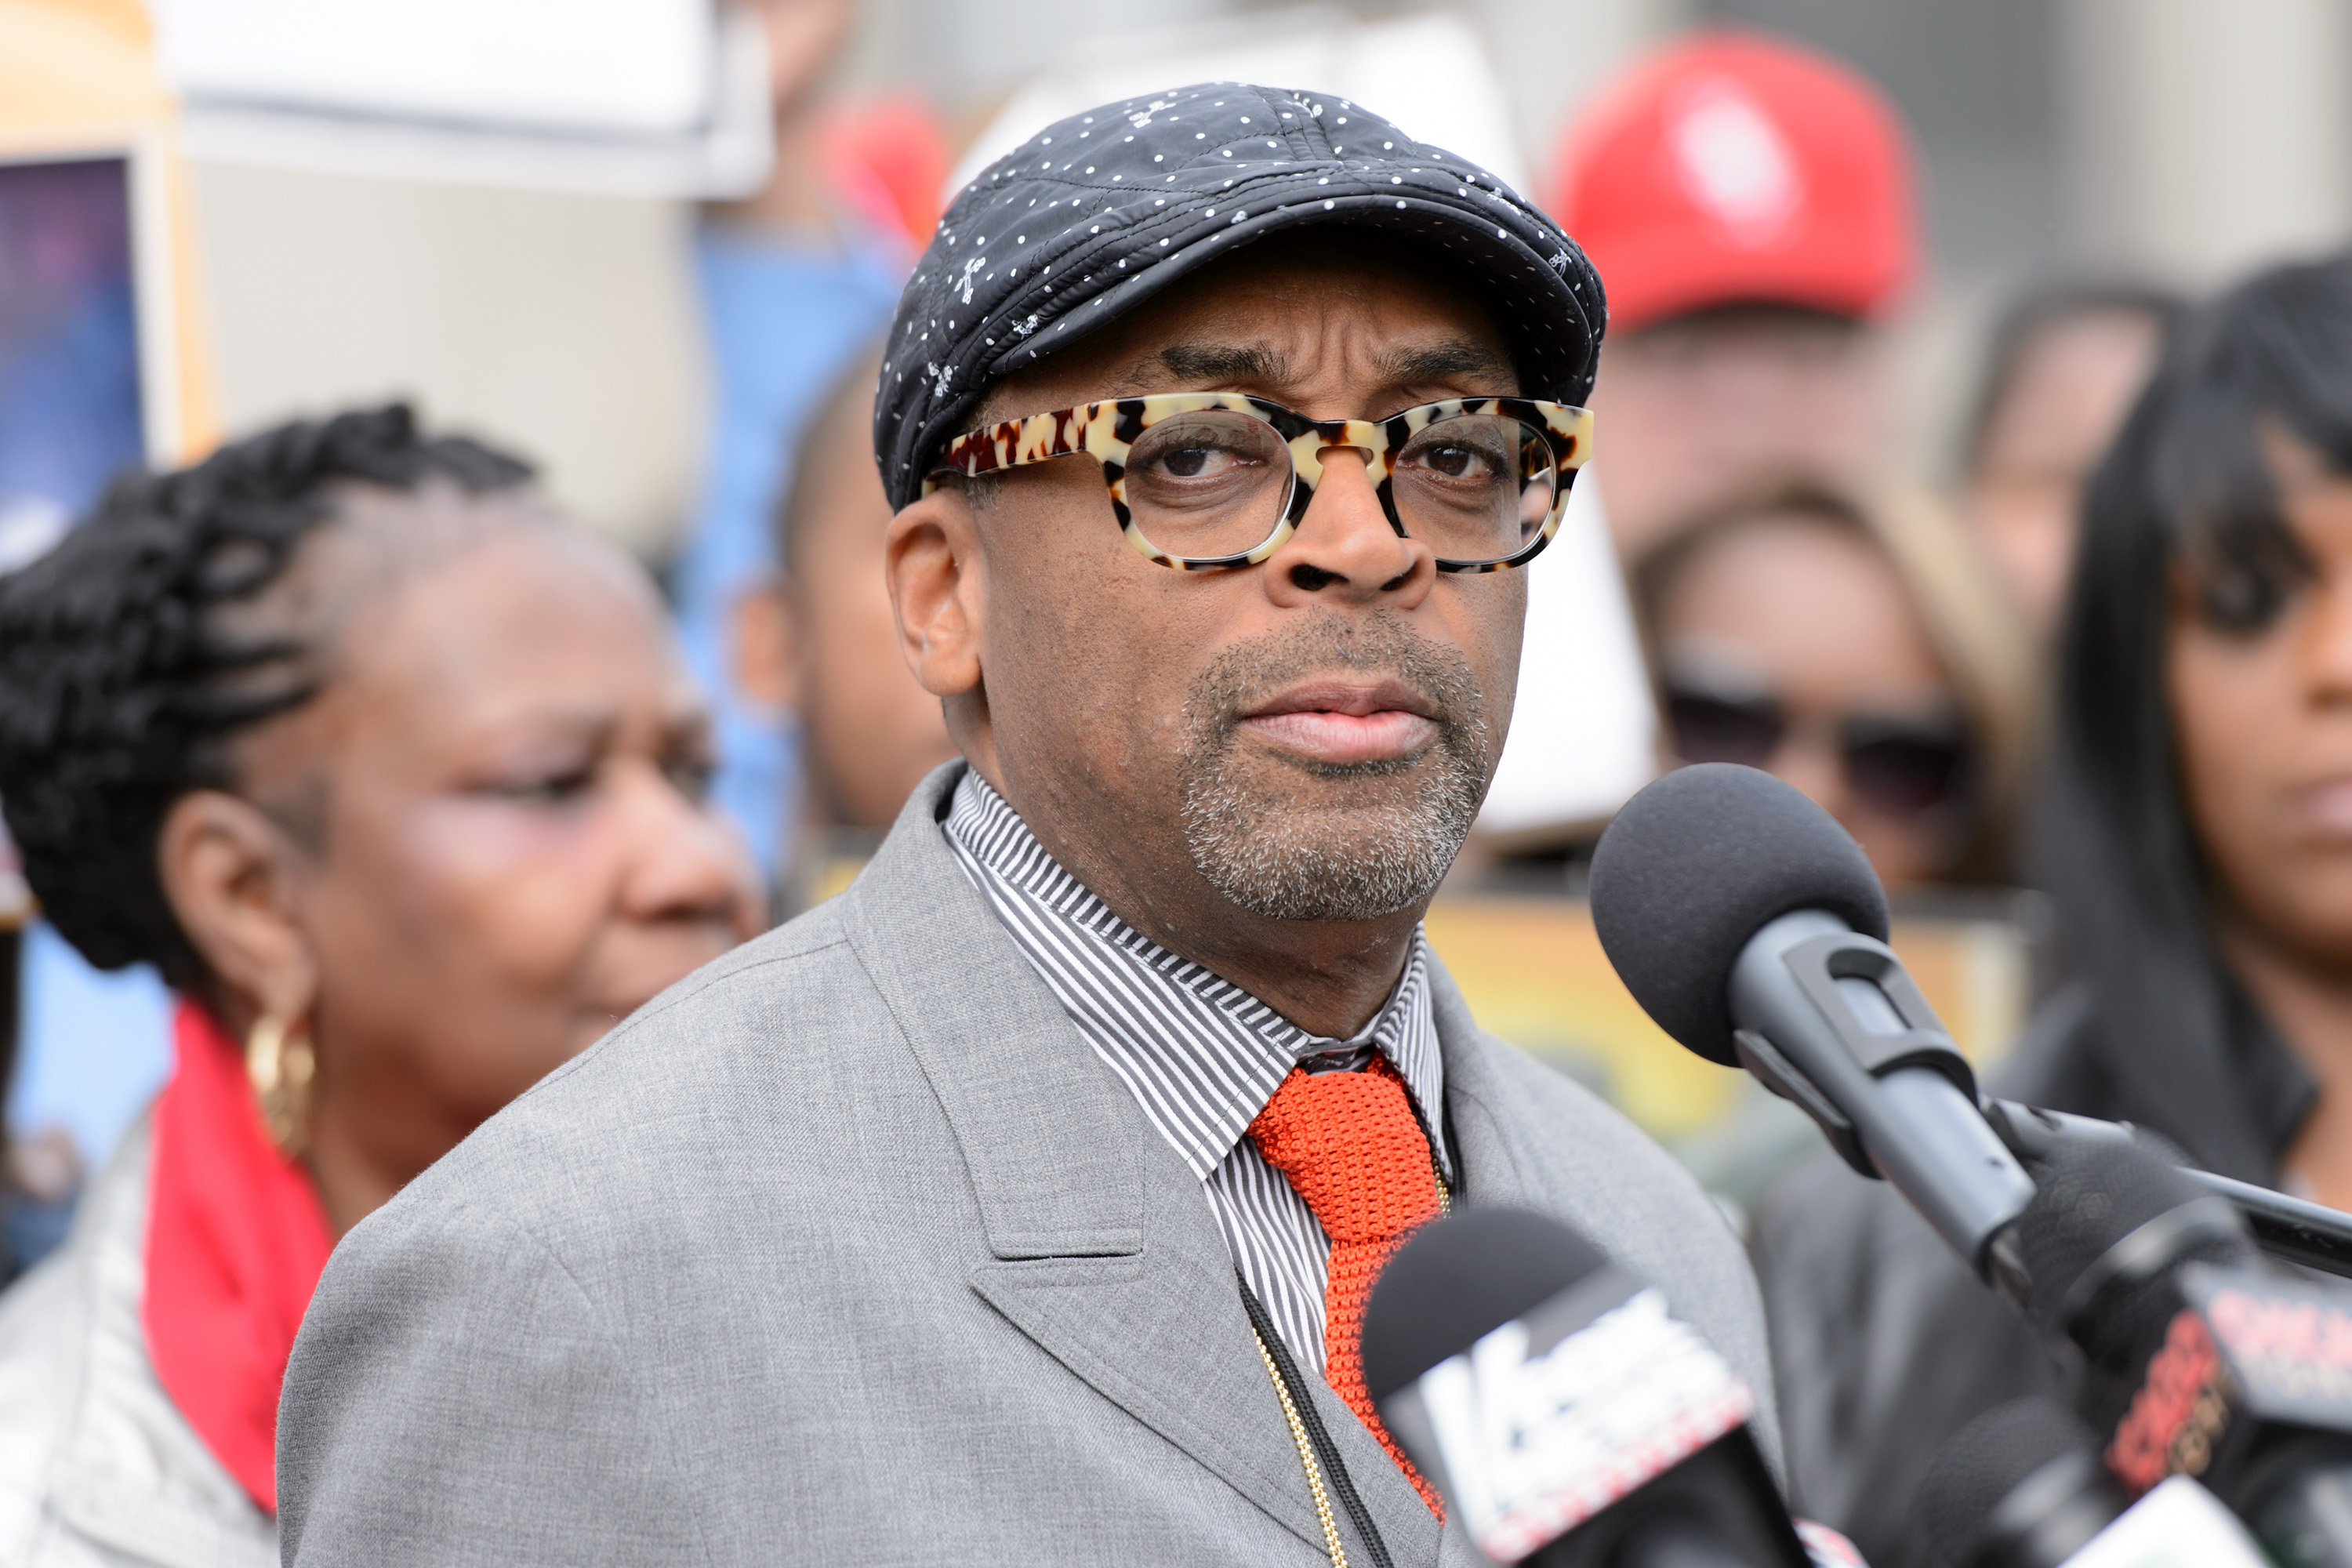 Spike Lee attends a press conference to discuss the upcoming film 'Chiraq' at St. Sabina Church on May 14, 2015 in Chicago. (Daniel Boczarski—Getty Images)